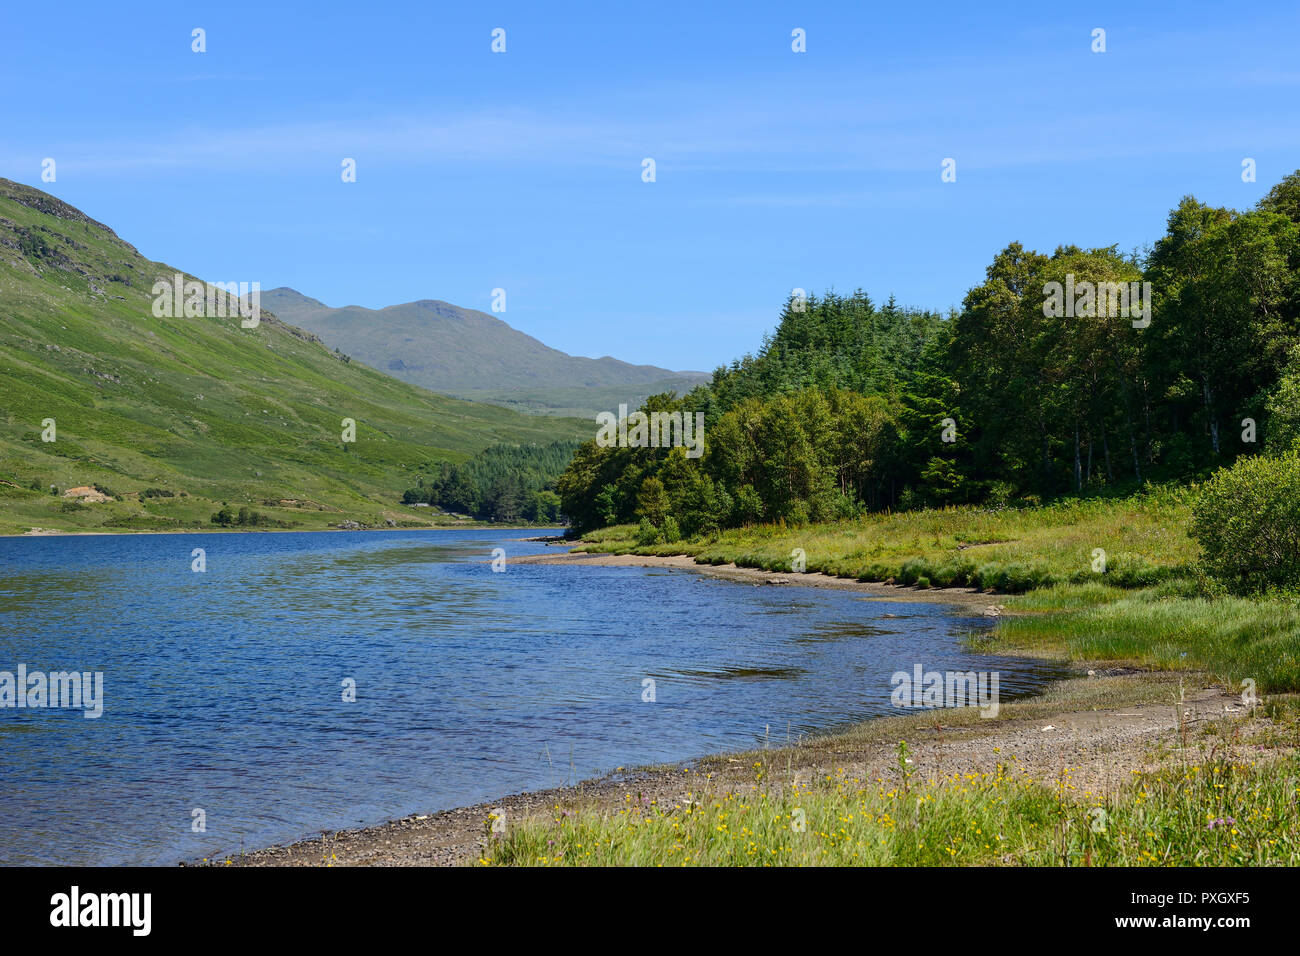 Loch Lubhair in the Loch Lomond and Trossachs National Park, east of Crainlarich on the A85, Stirling Region, Scotland Stock Photo